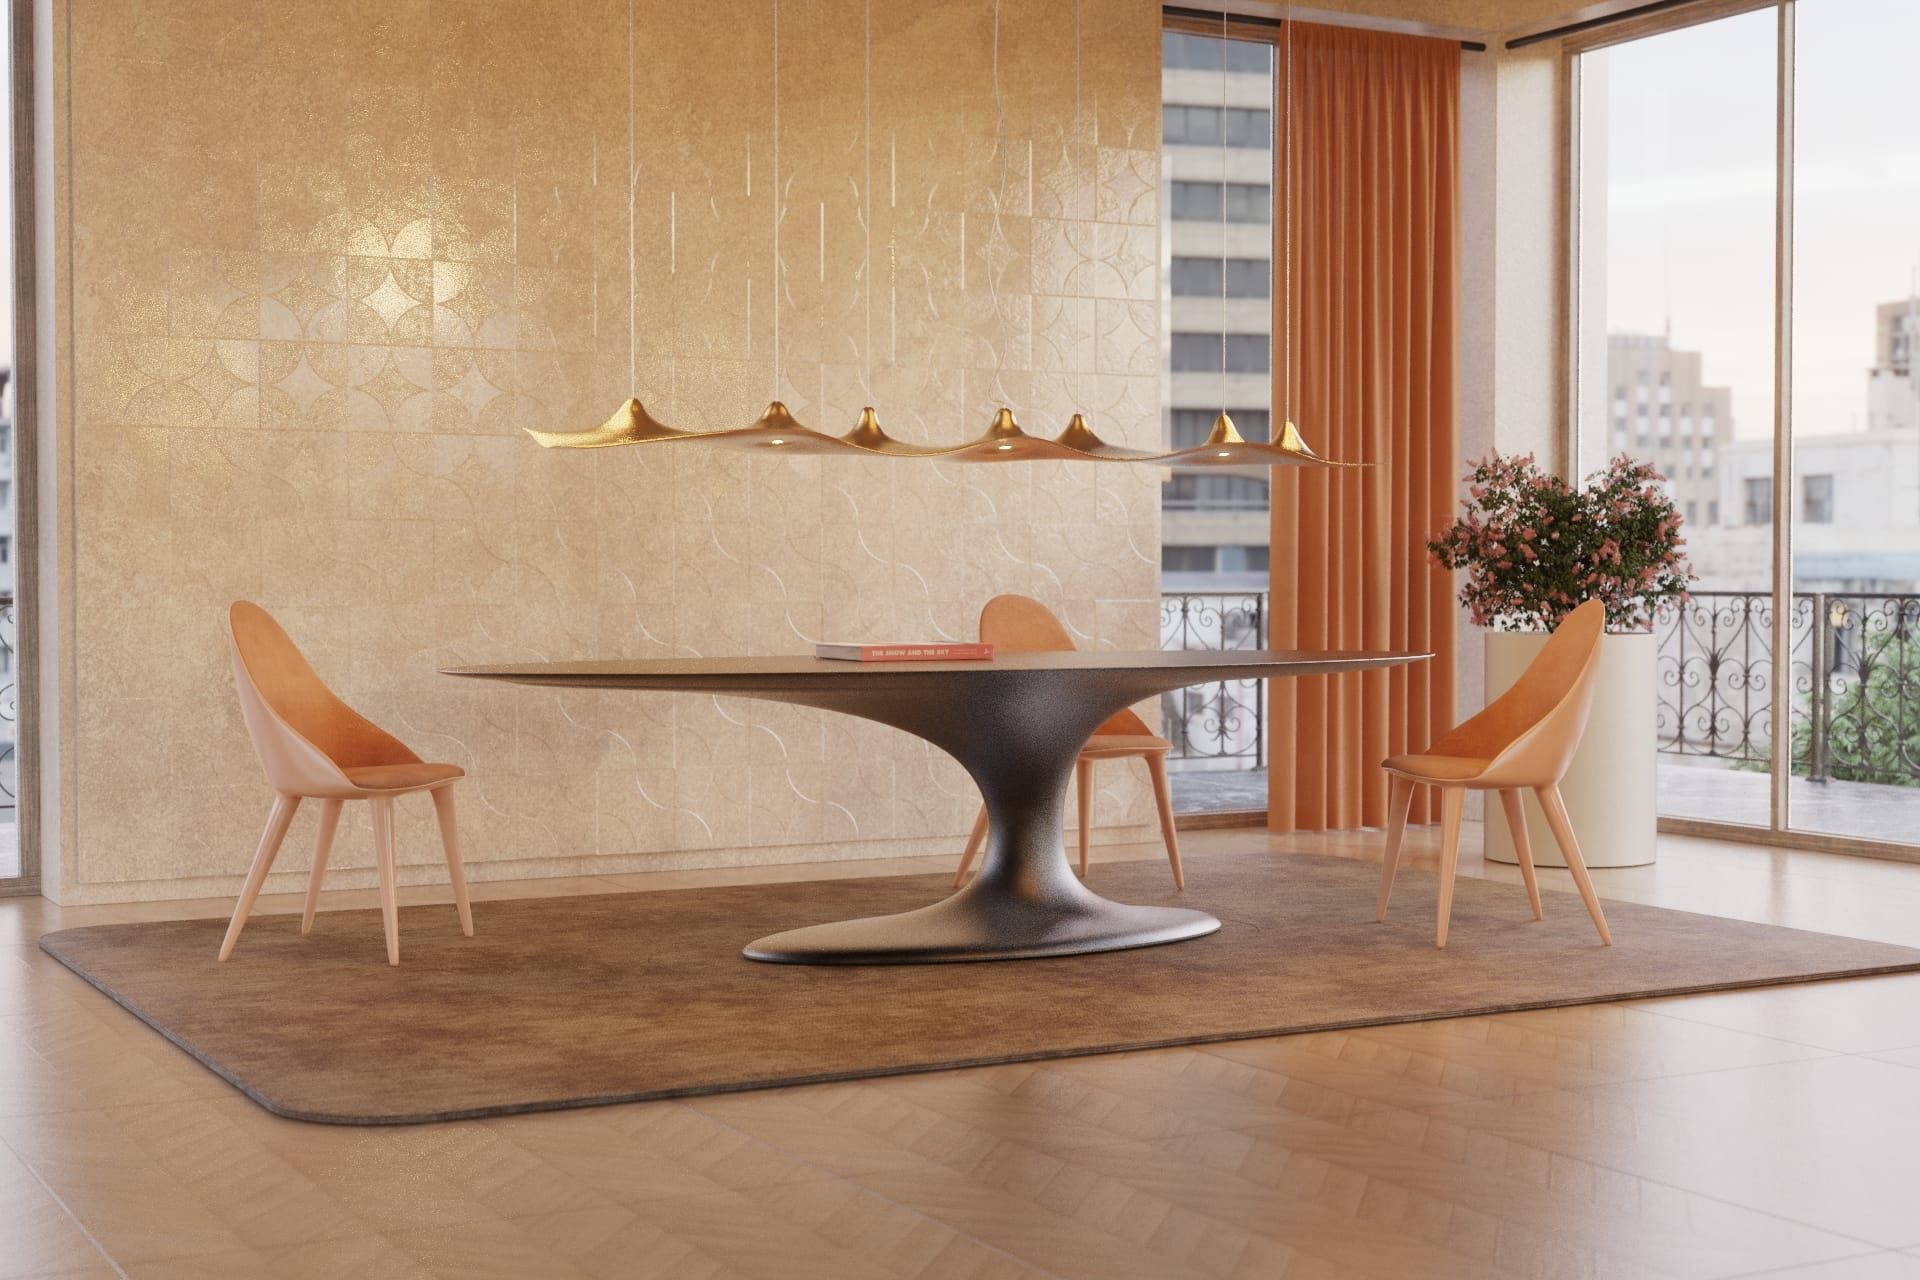 Jade dining table, Mónaco chair and Amplus suspension lamp featuring PANTONE Peach Fuzz